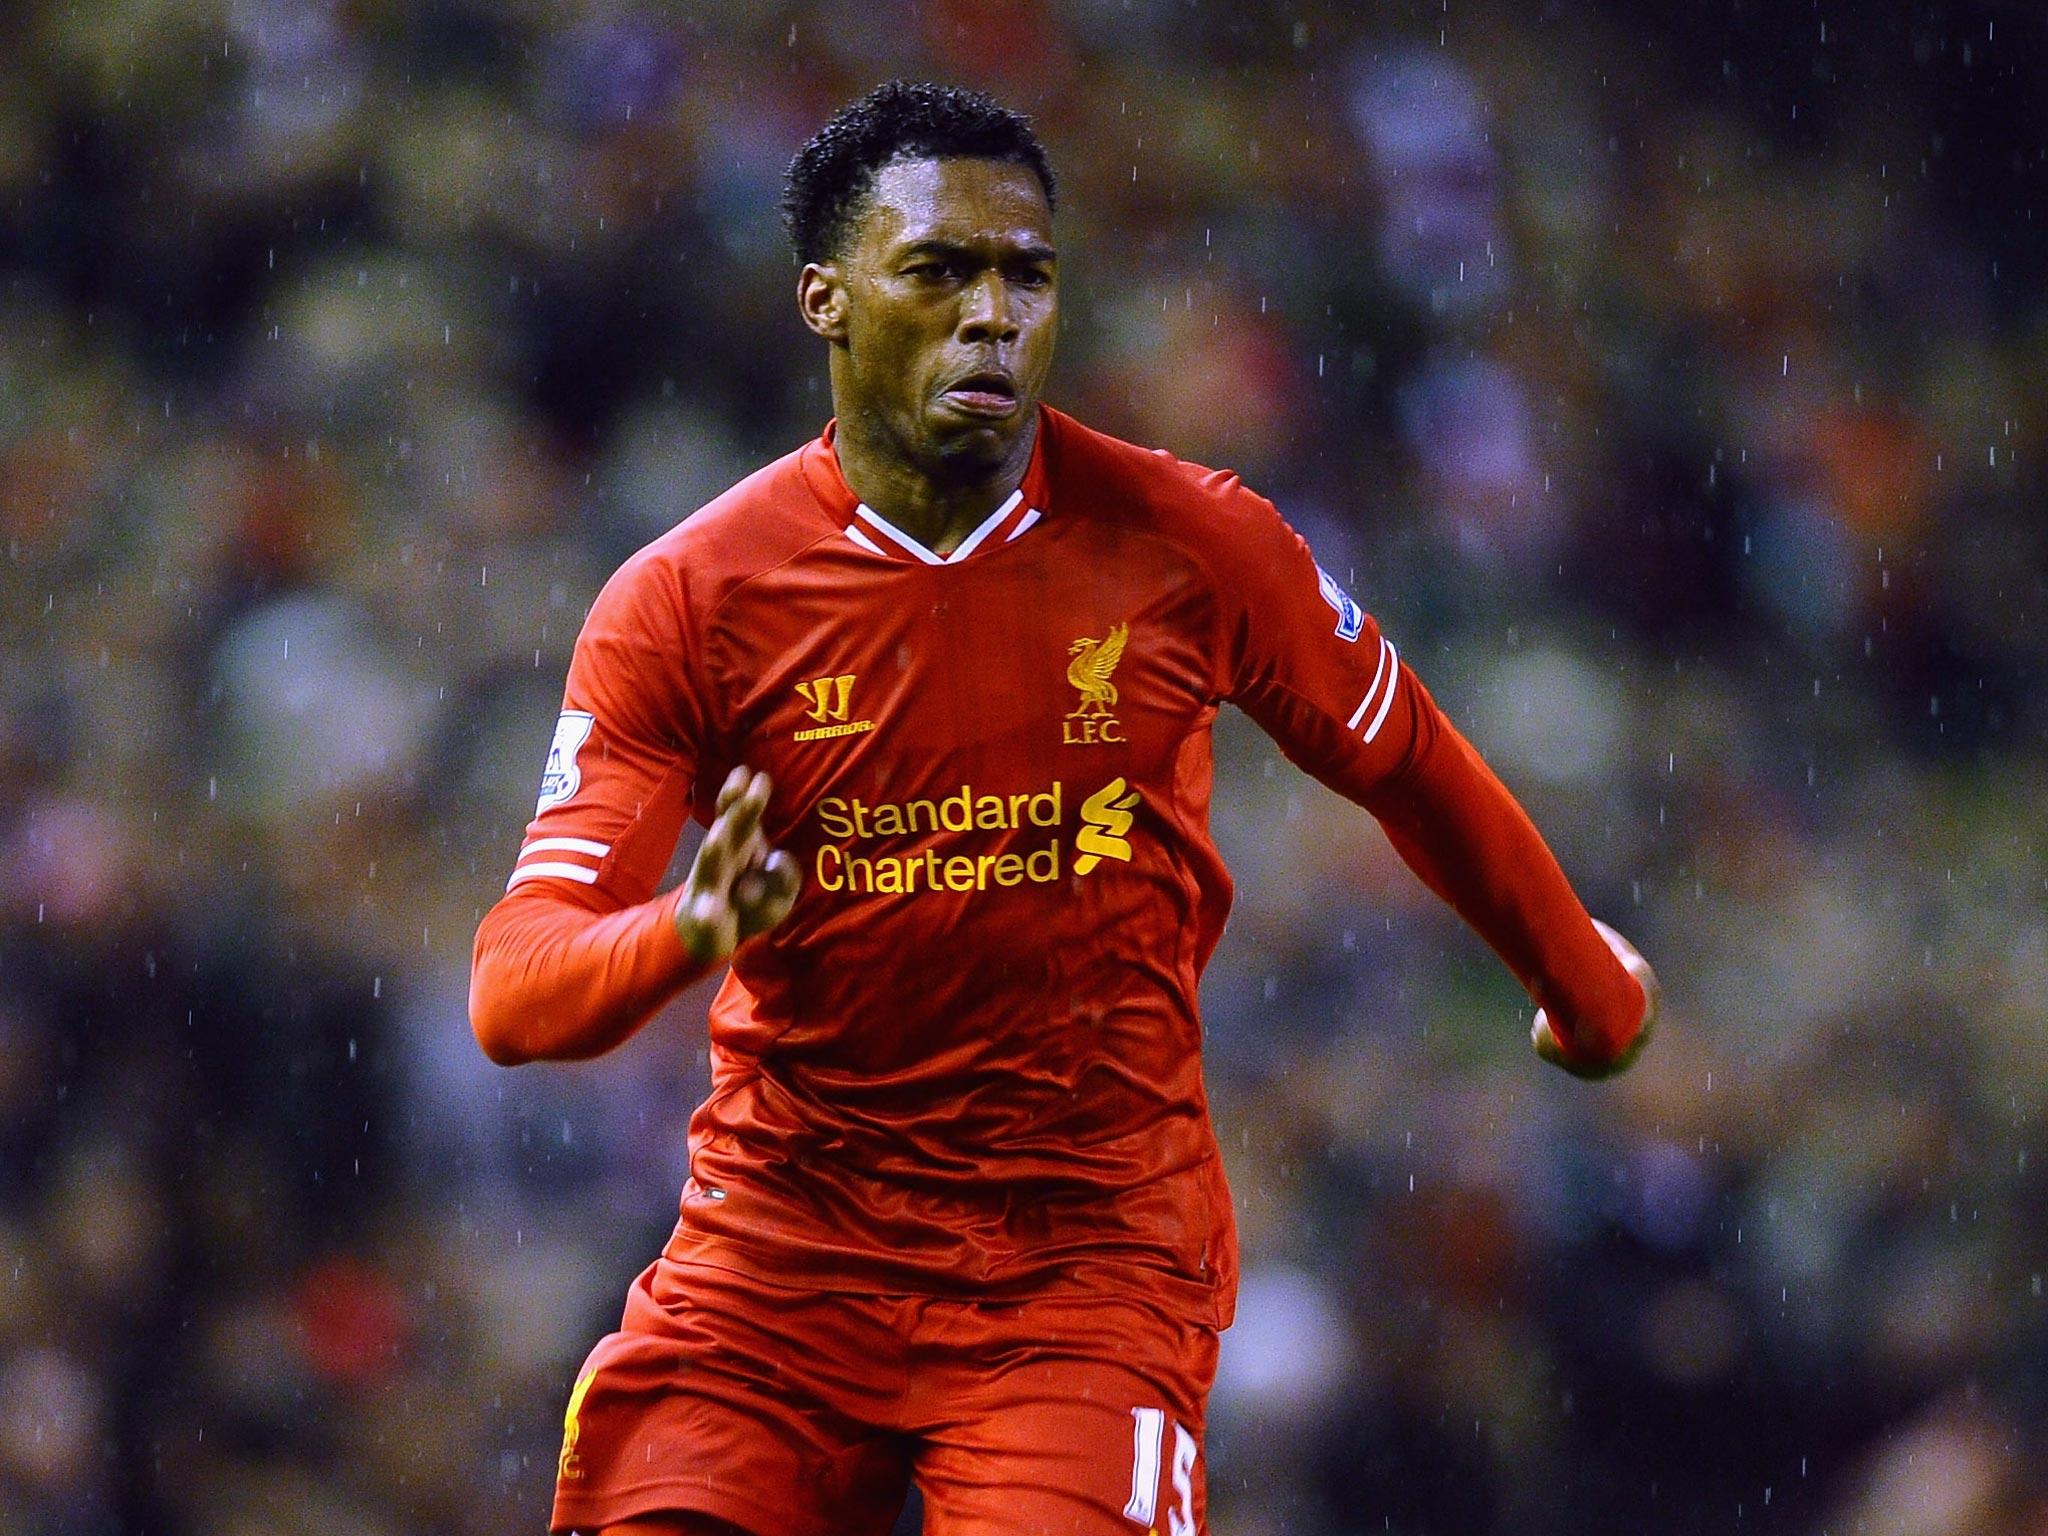 Daniel Sturridge has been as prolific in video games as he has been in the real world